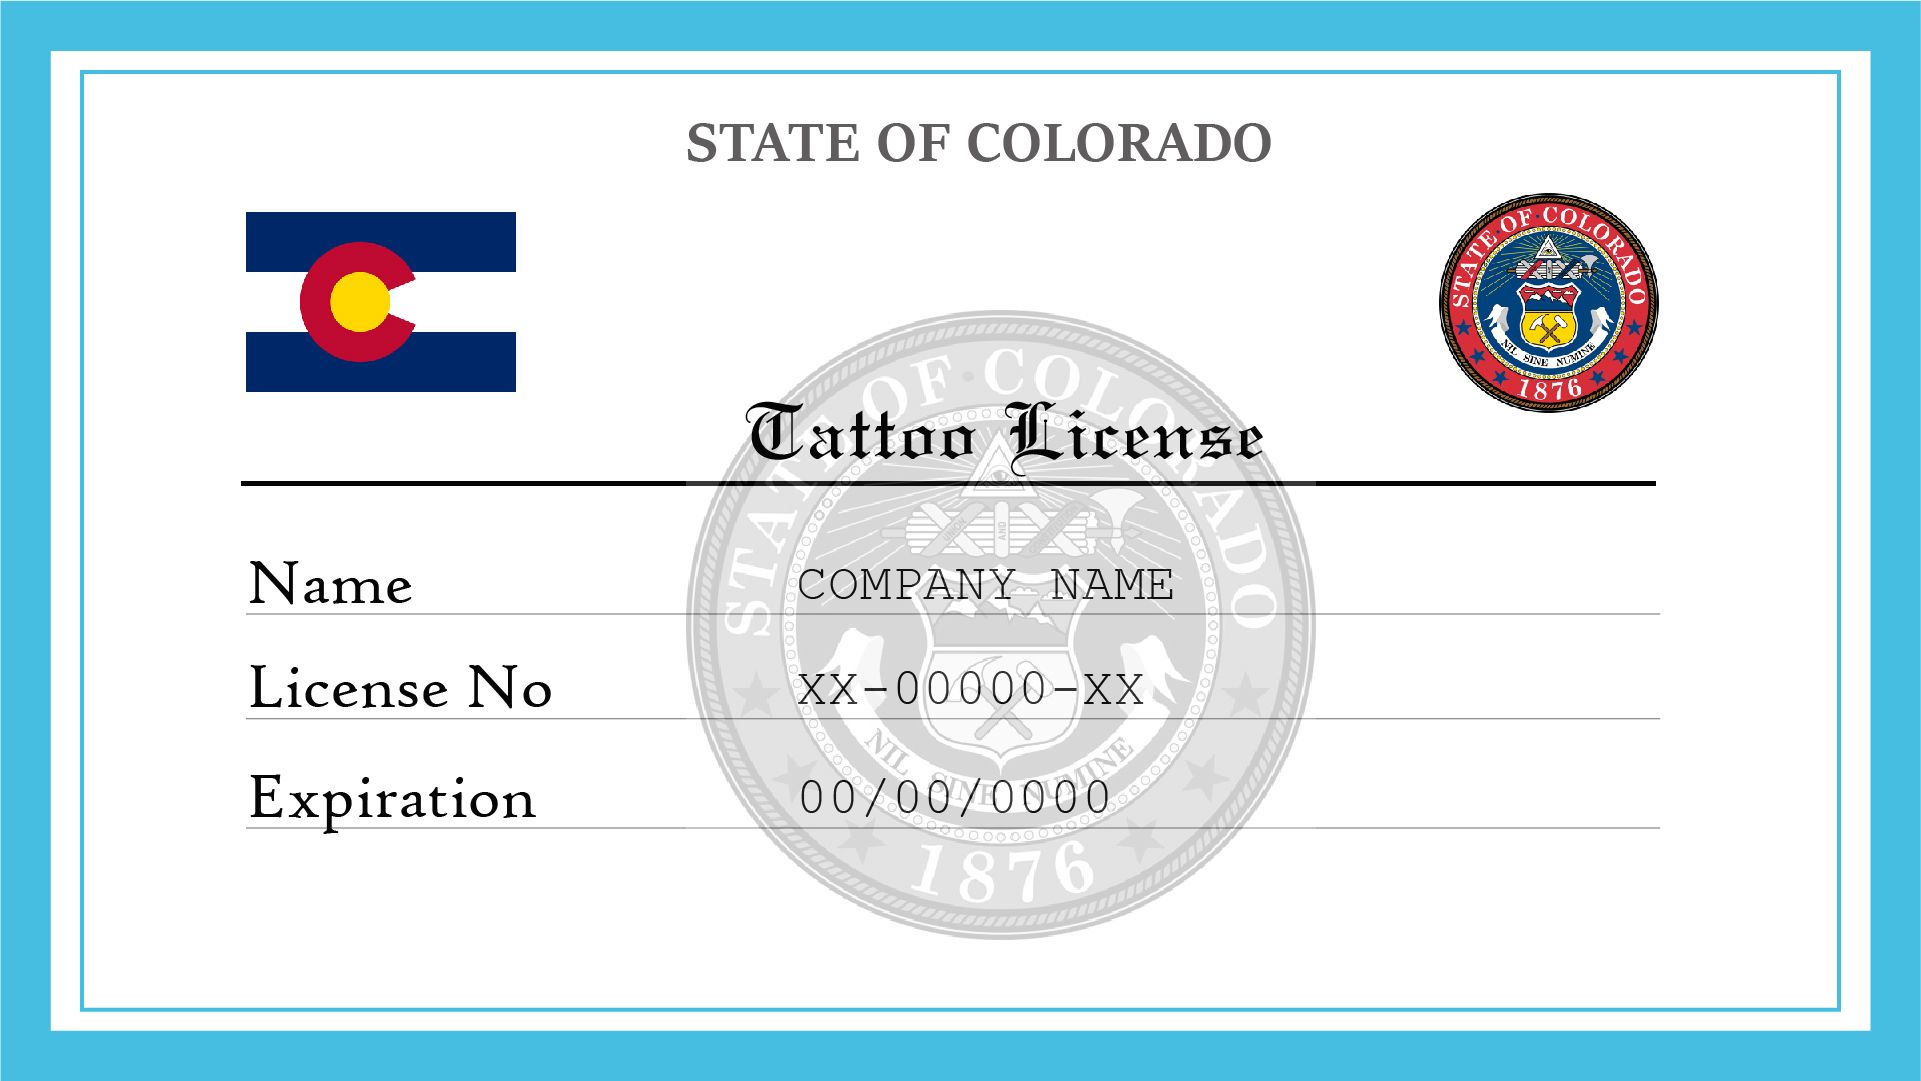 How to get a tattoo license in colorado